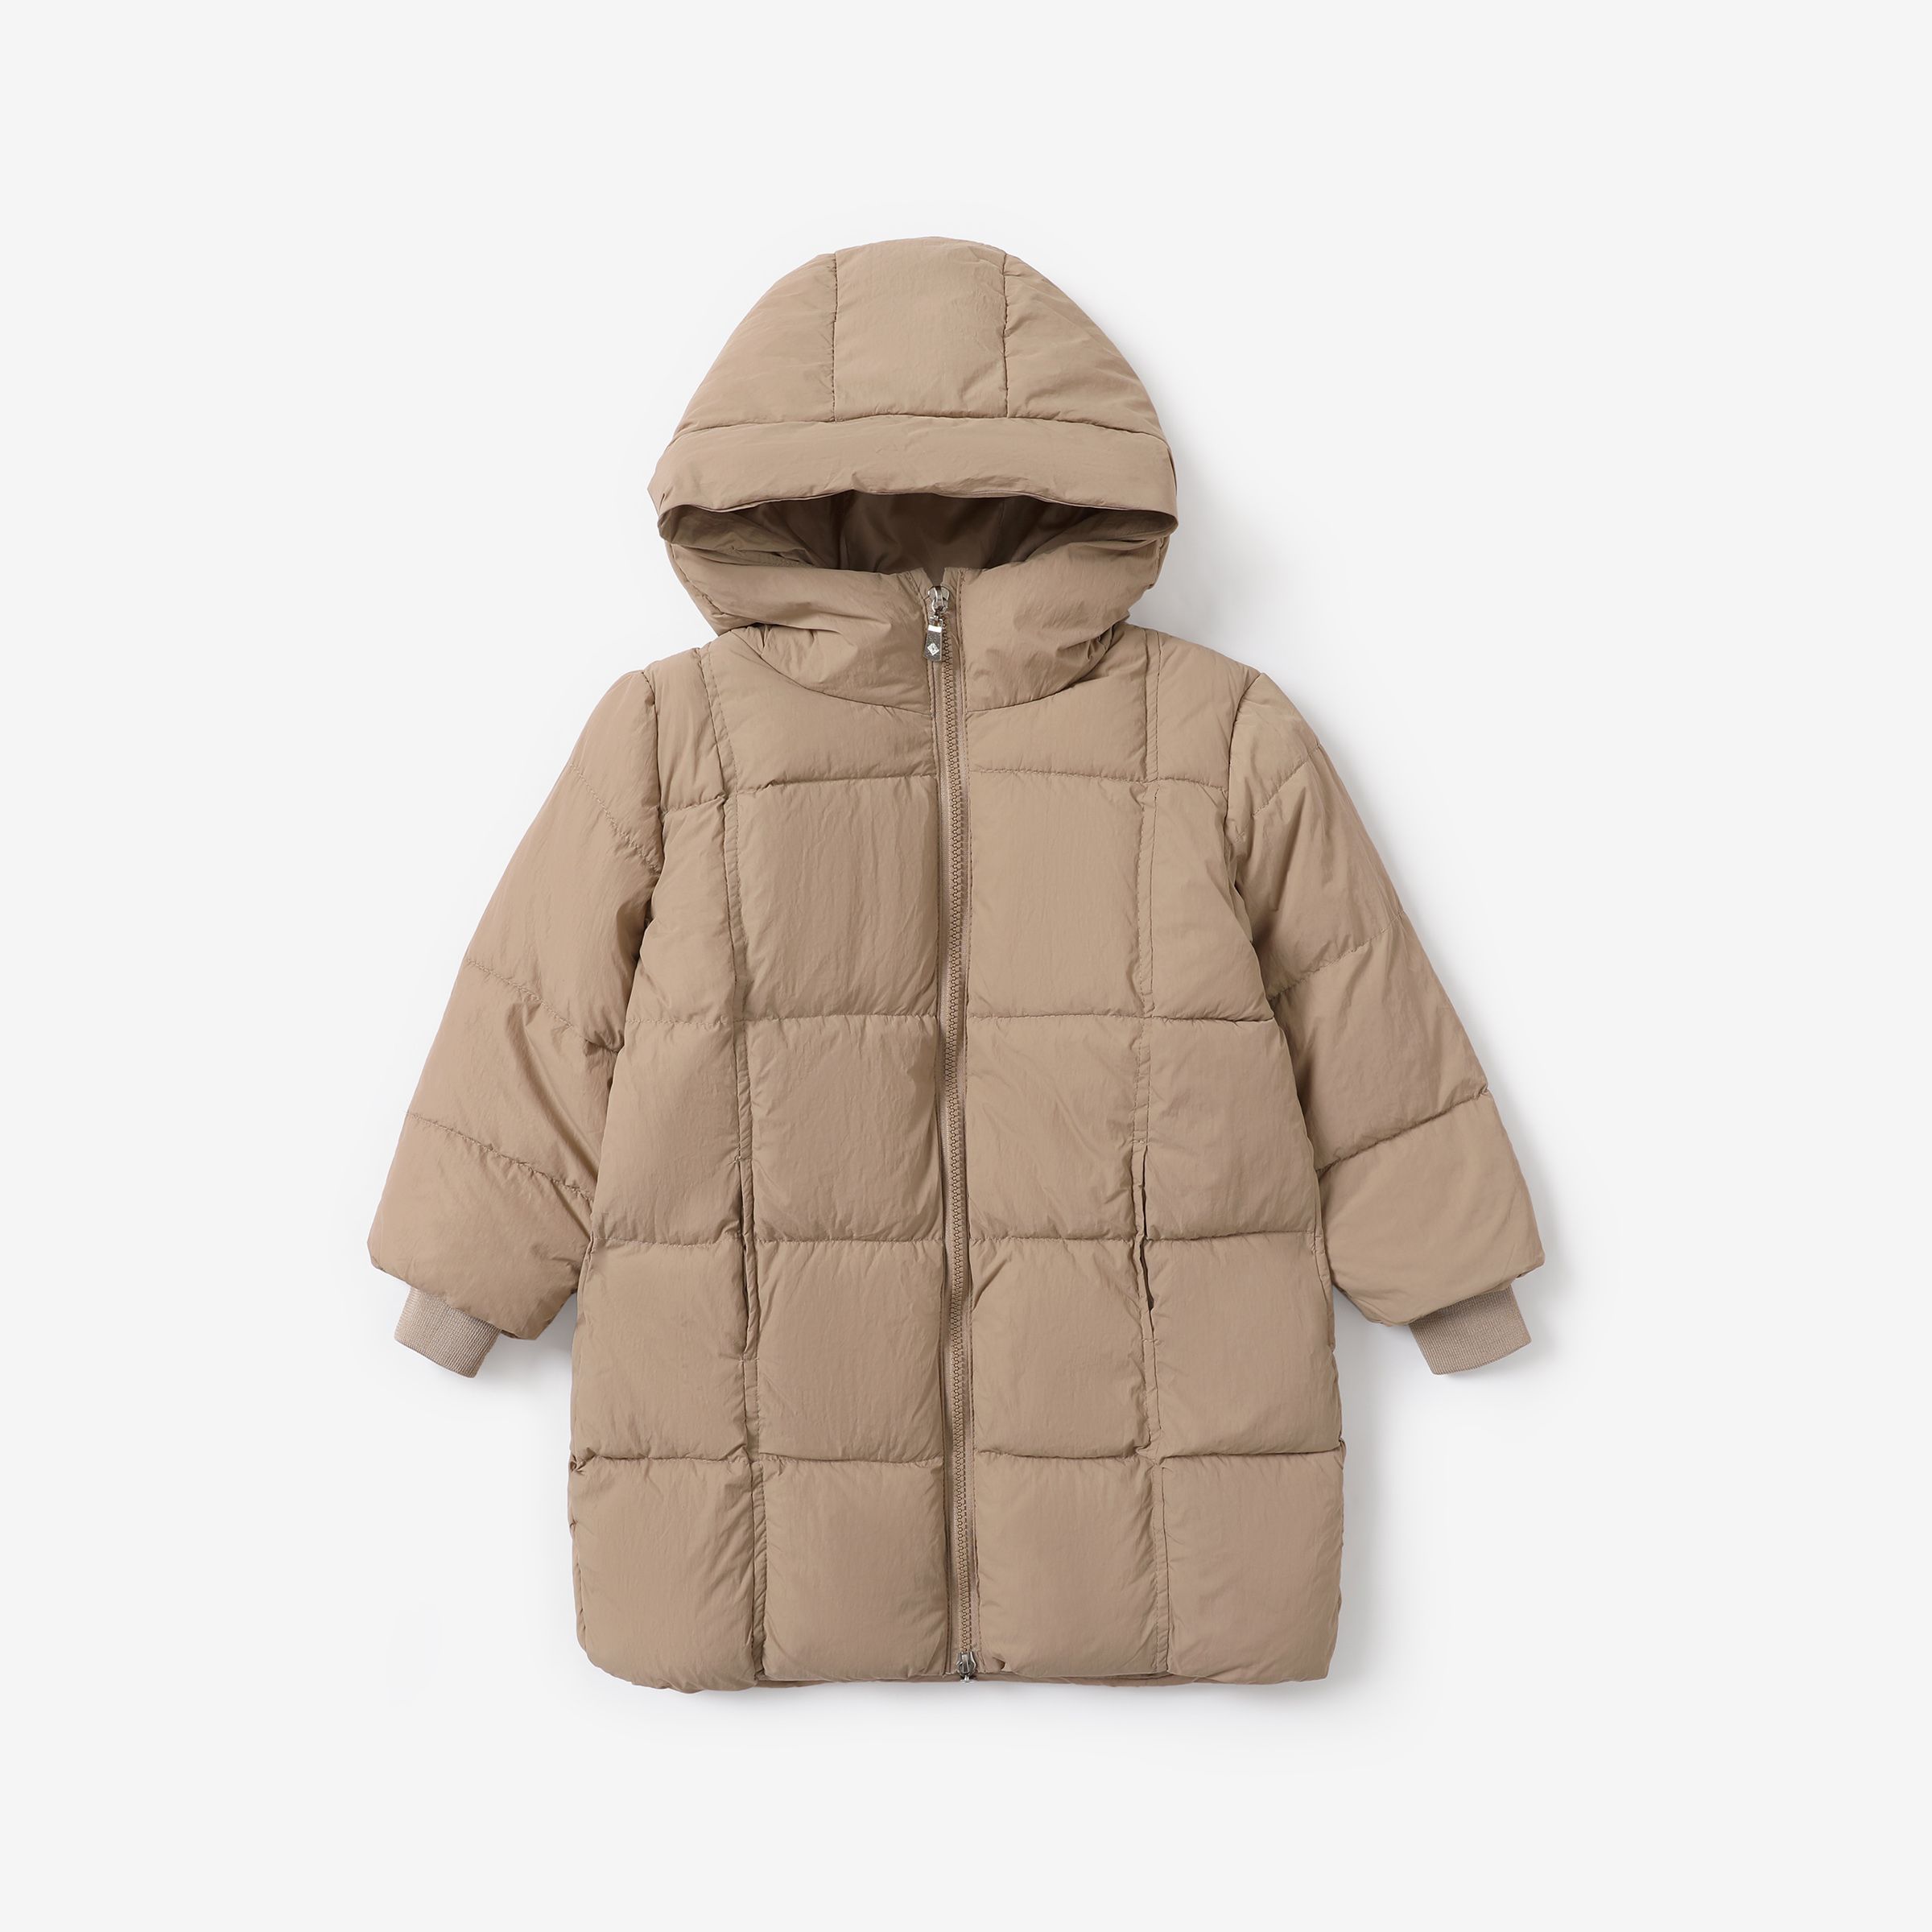 Kid Girl/Boy Solid Color Hooded Oversized Down Jacket -with Pocket And Zipper